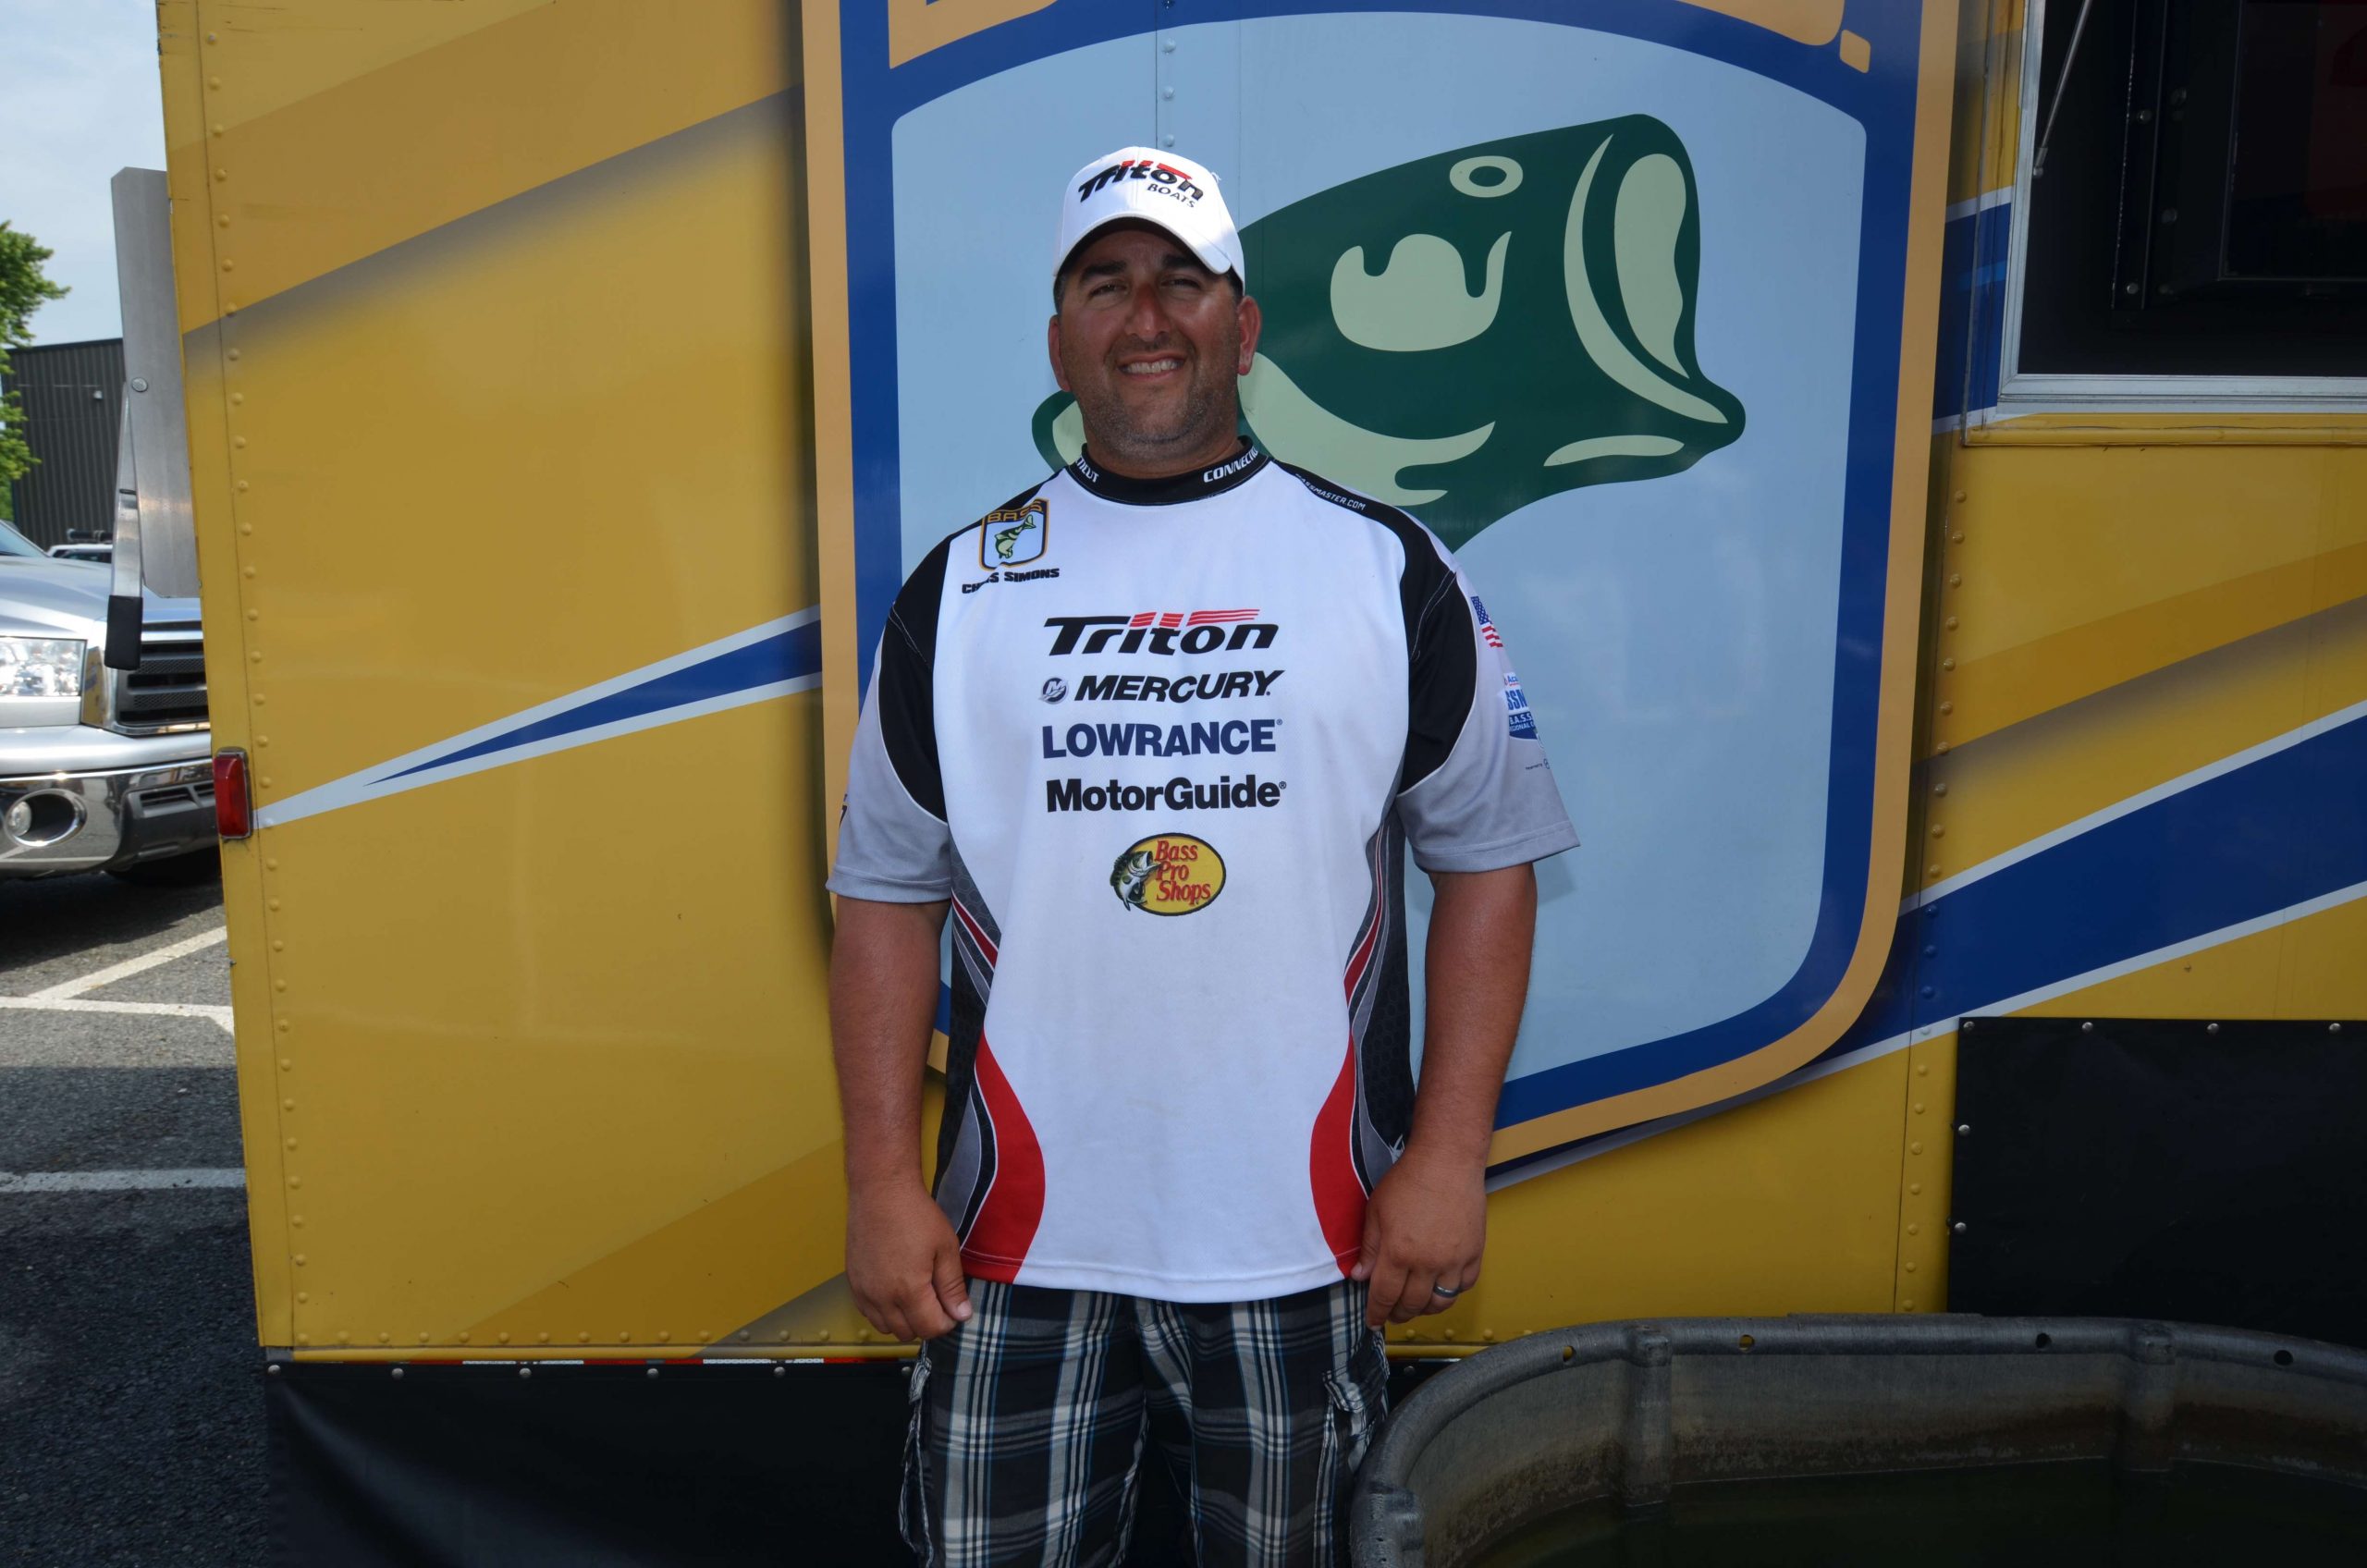 <h4>Chris Simons</h4>
Connecticut Nonboater<br>
B.A.S.S. Nation Club: Milford Black Bass<BR>
Occupation:  Manager Tackle Supply Depot<BR>
Hobbies: Outdoors<BR>
Sponsors: Tackle Supply Depot, Quantum, Stormr, Reynolds Garage and Marine, The Rod Glove, XZone Lures 
